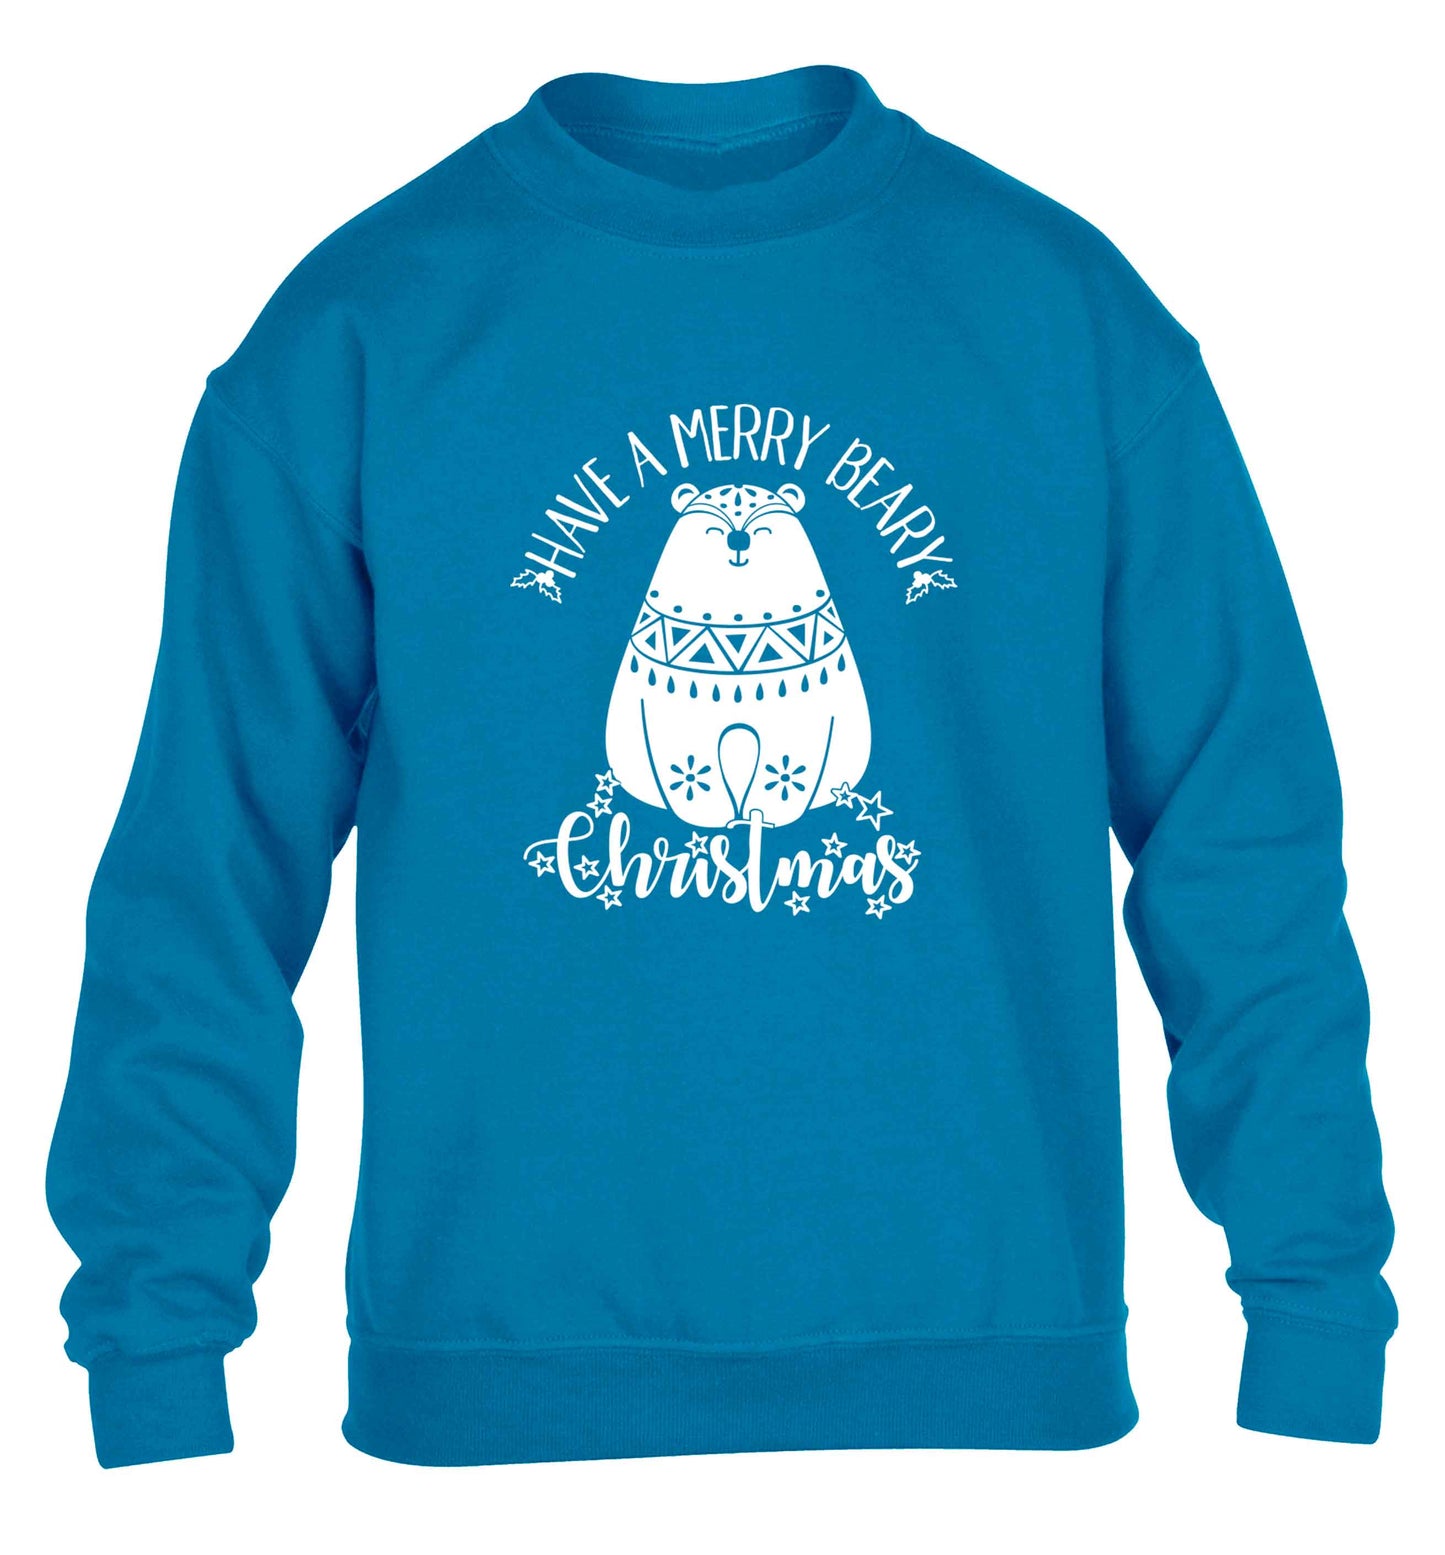 Have a merry beary Christmas children's blue sweater 12-13 Years